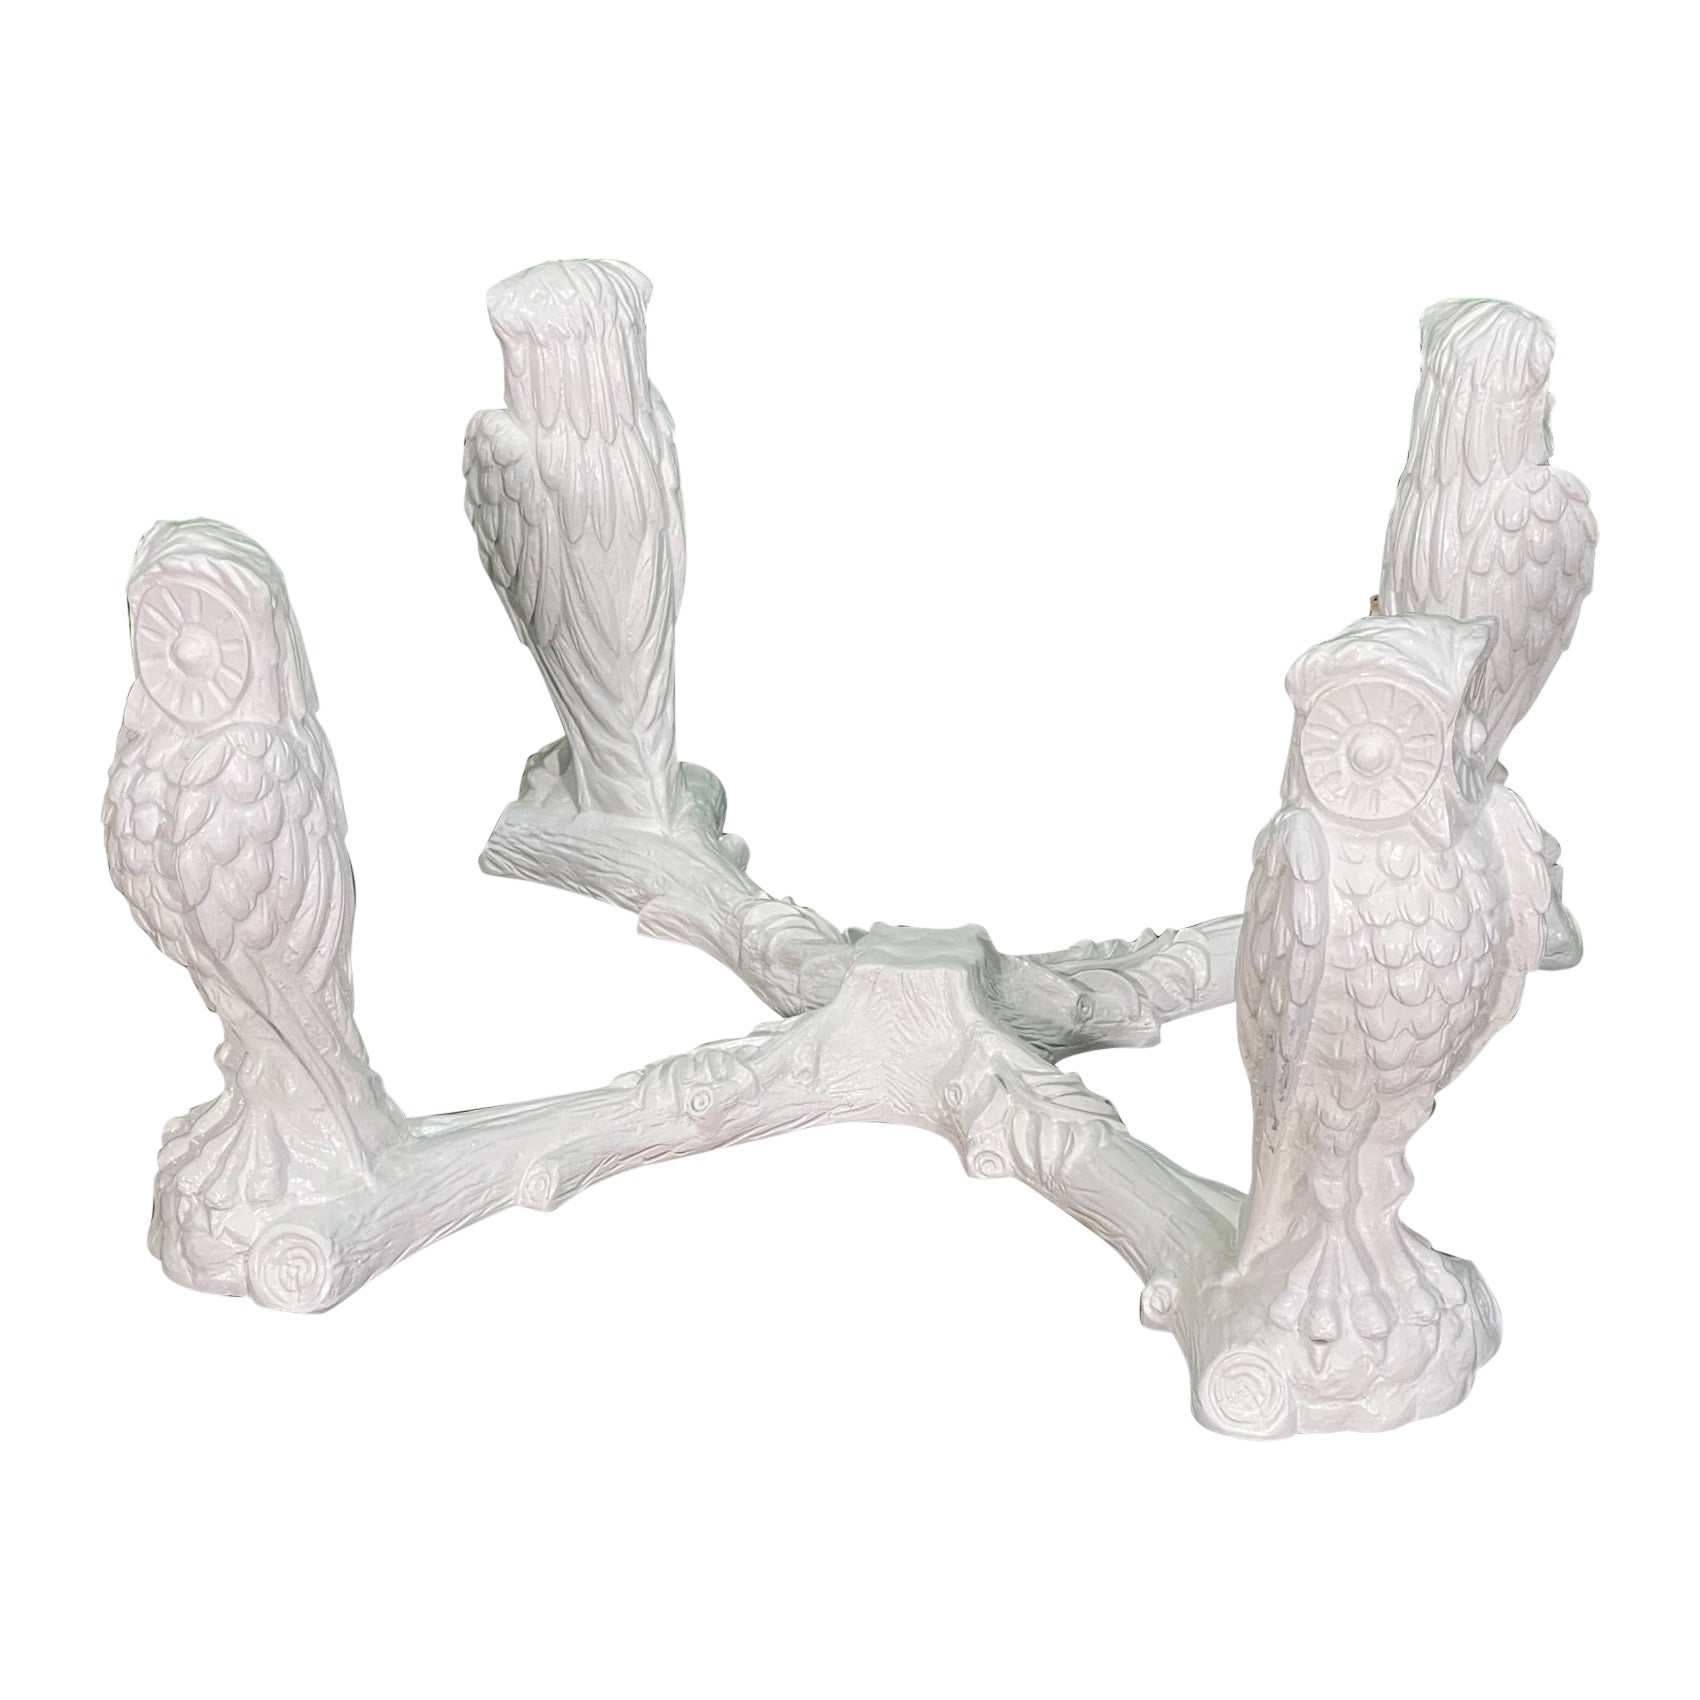 Gampel Stoll Sculptural Owl Coffee Table Base For Sale